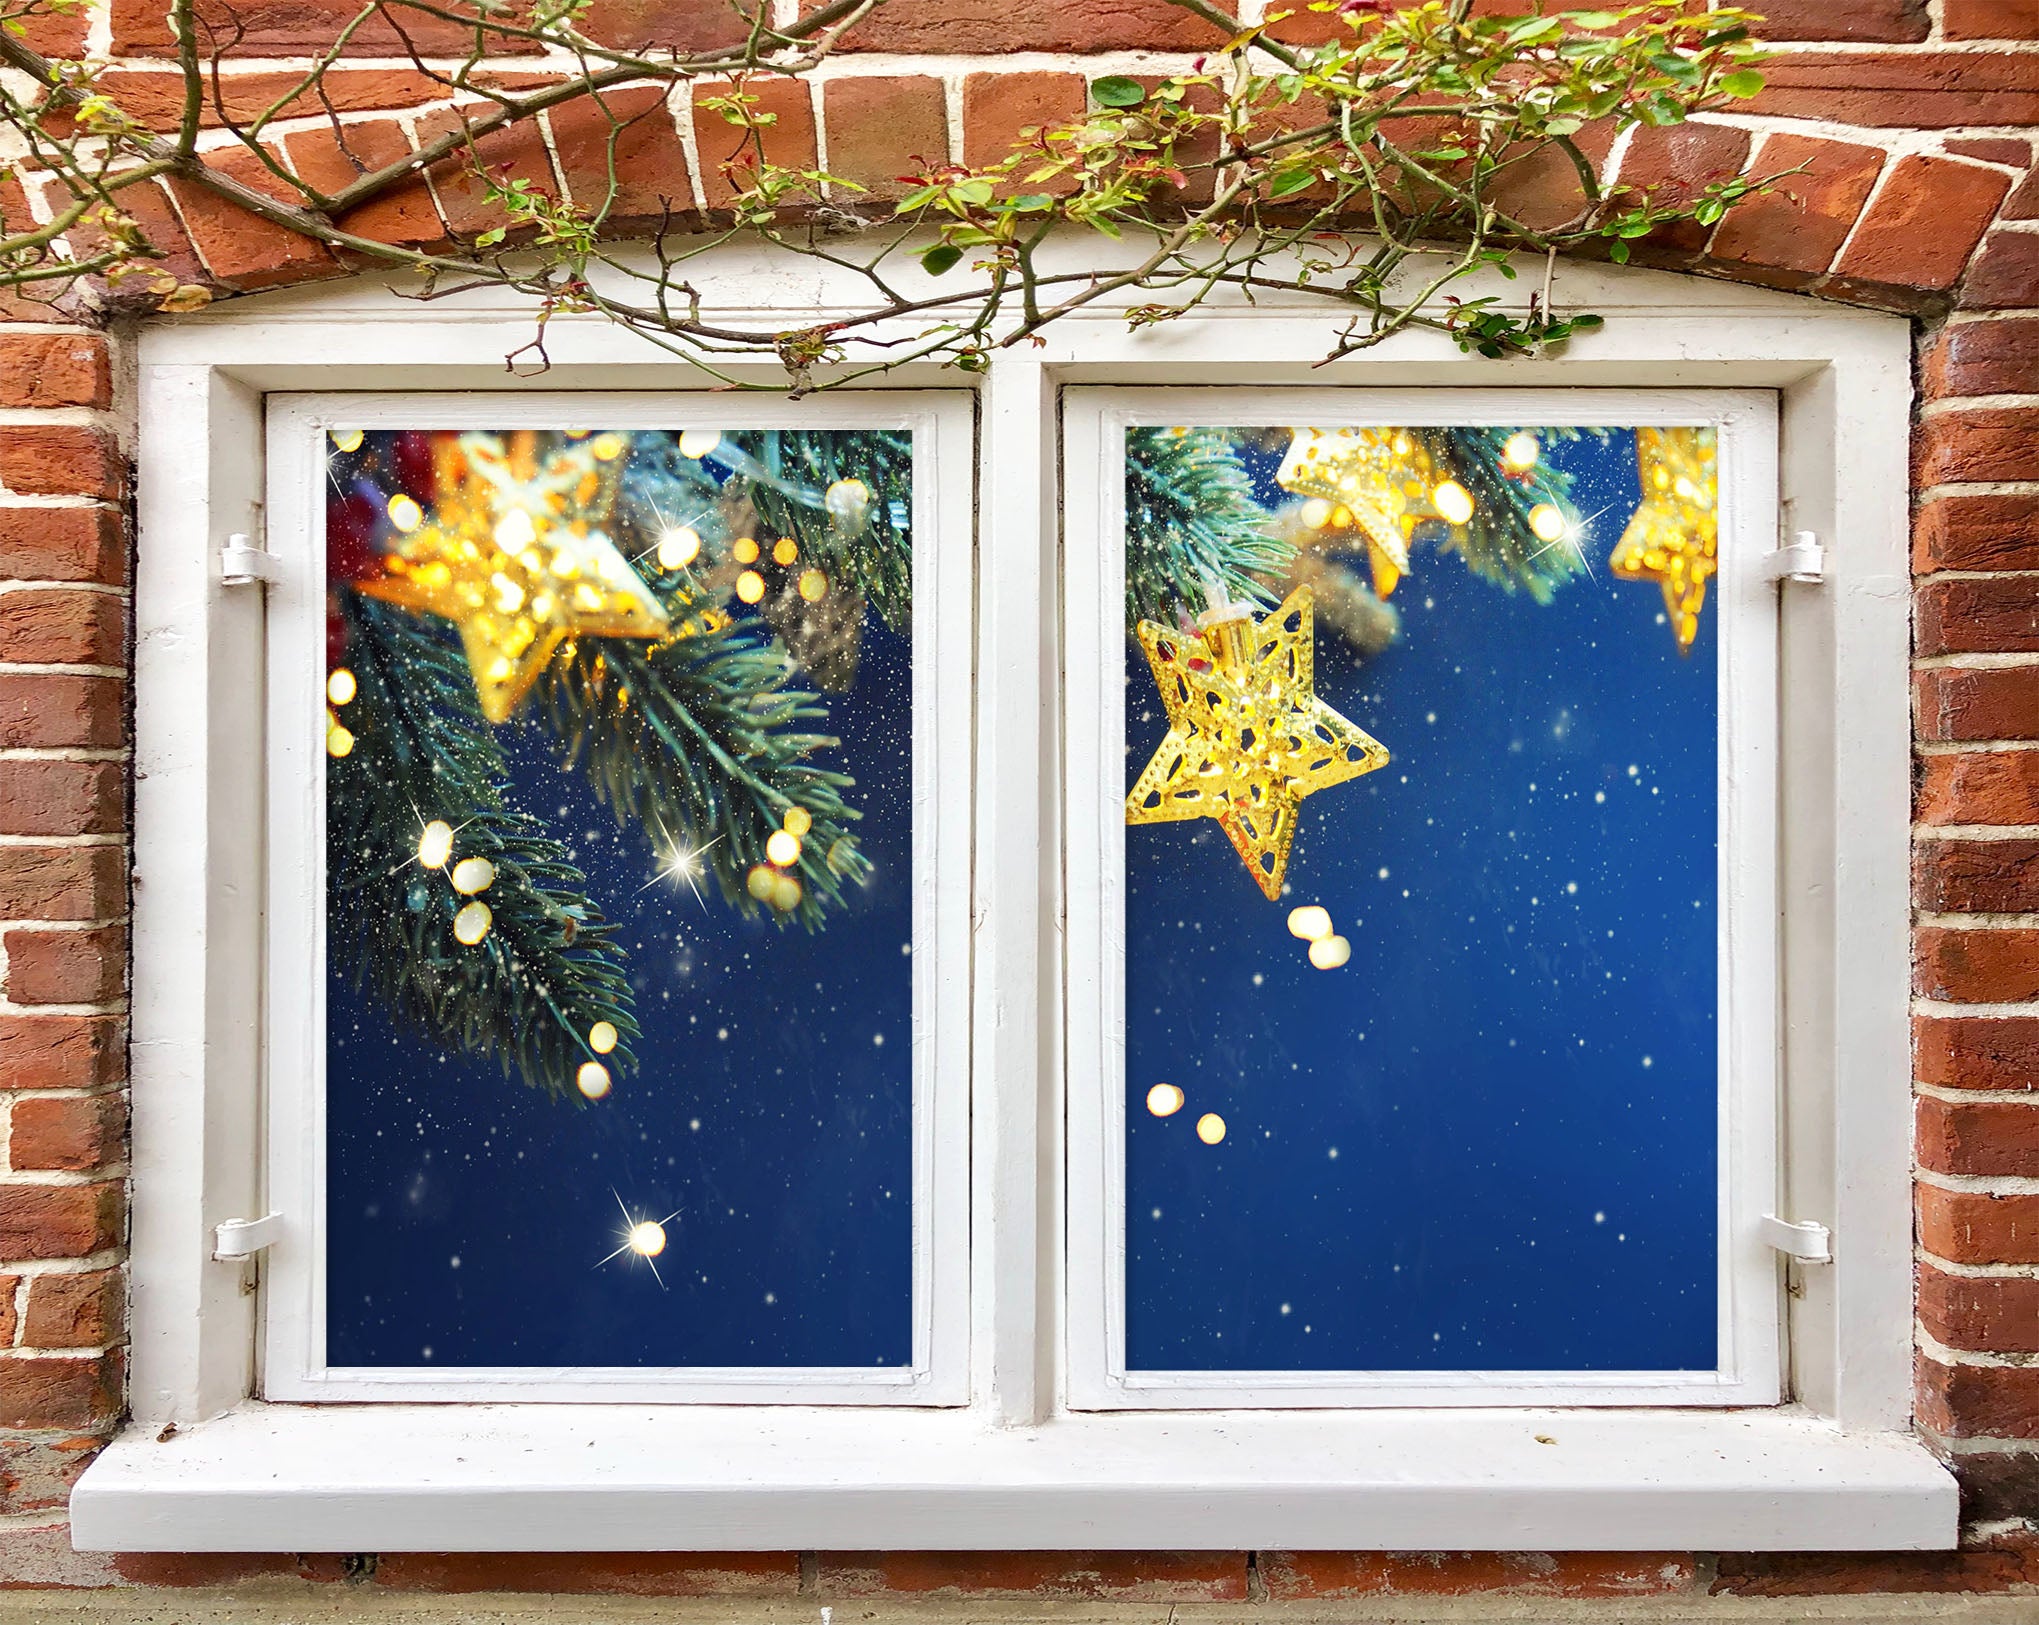 3D Five-Pointed Star 31043 Christmas Window Film Print Sticker Cling Stained Glass Xmas